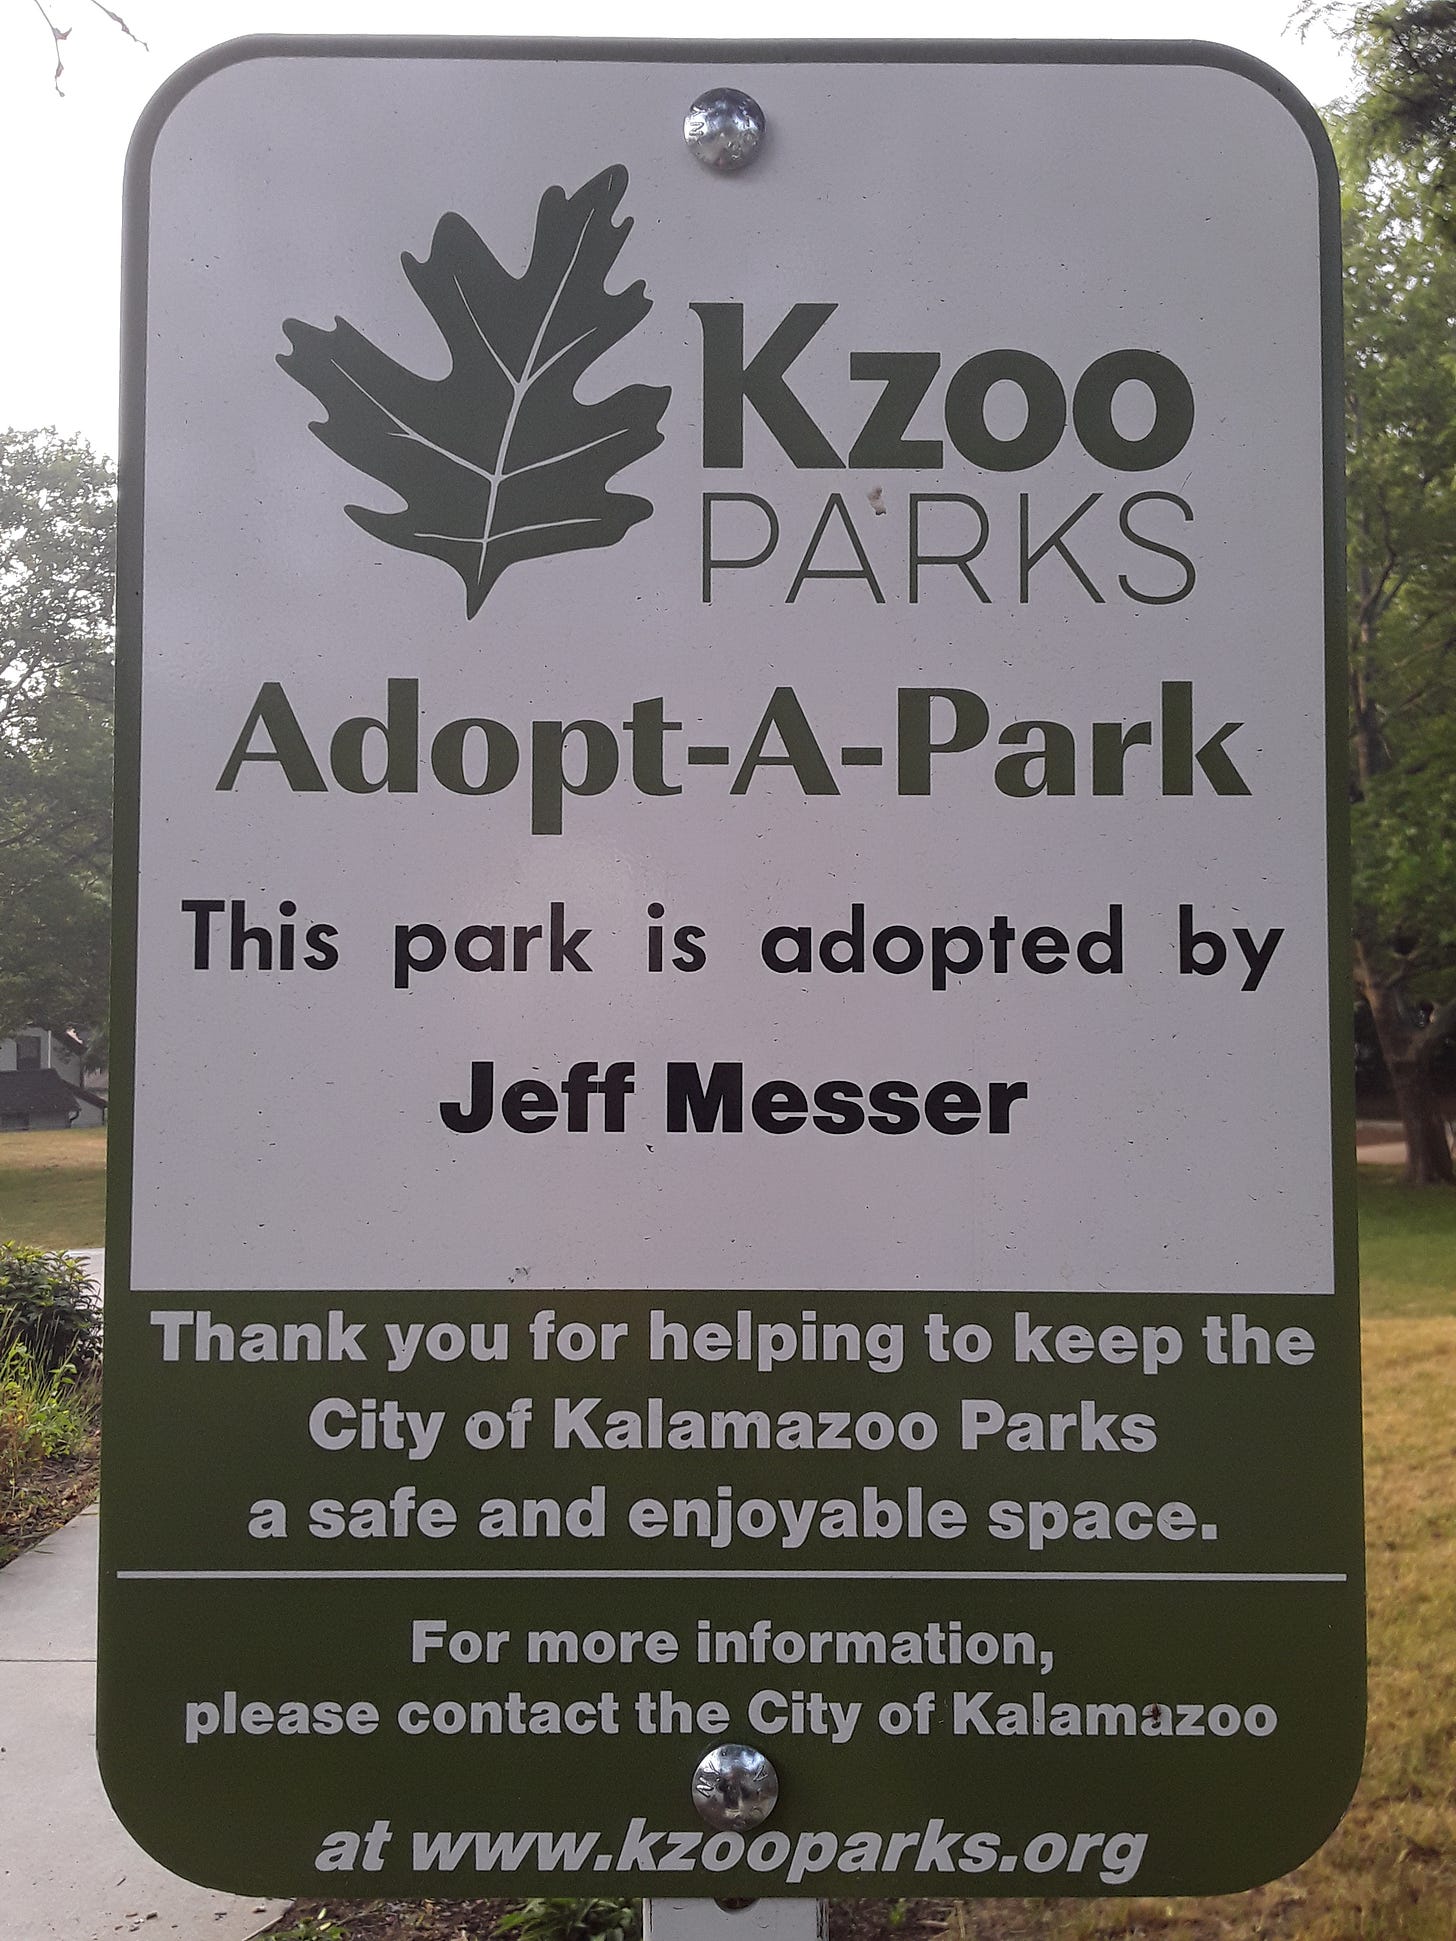 Photograph of the Kzoo Parks Adopt-A-Park sign in Davis Street Park on Wednesday, ‎June ‎28.  It reads:  "This park is adopted by Jeff Messer".